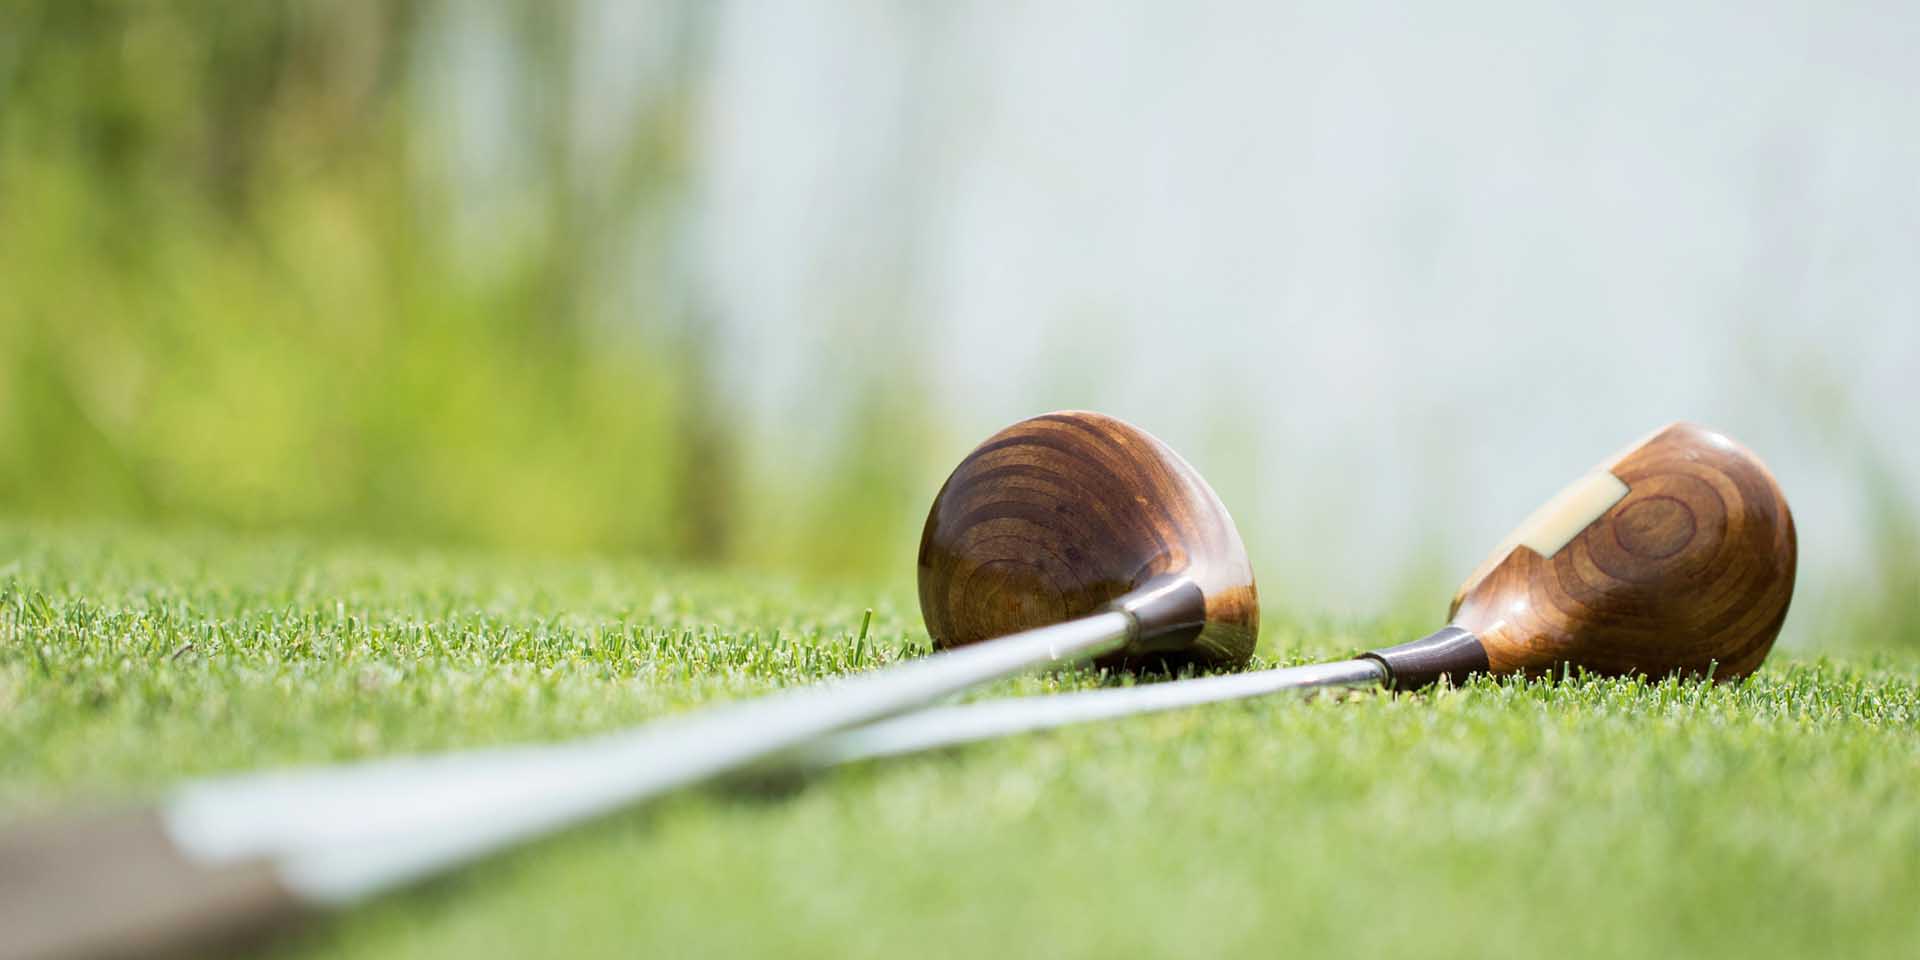 What is the history of golf?